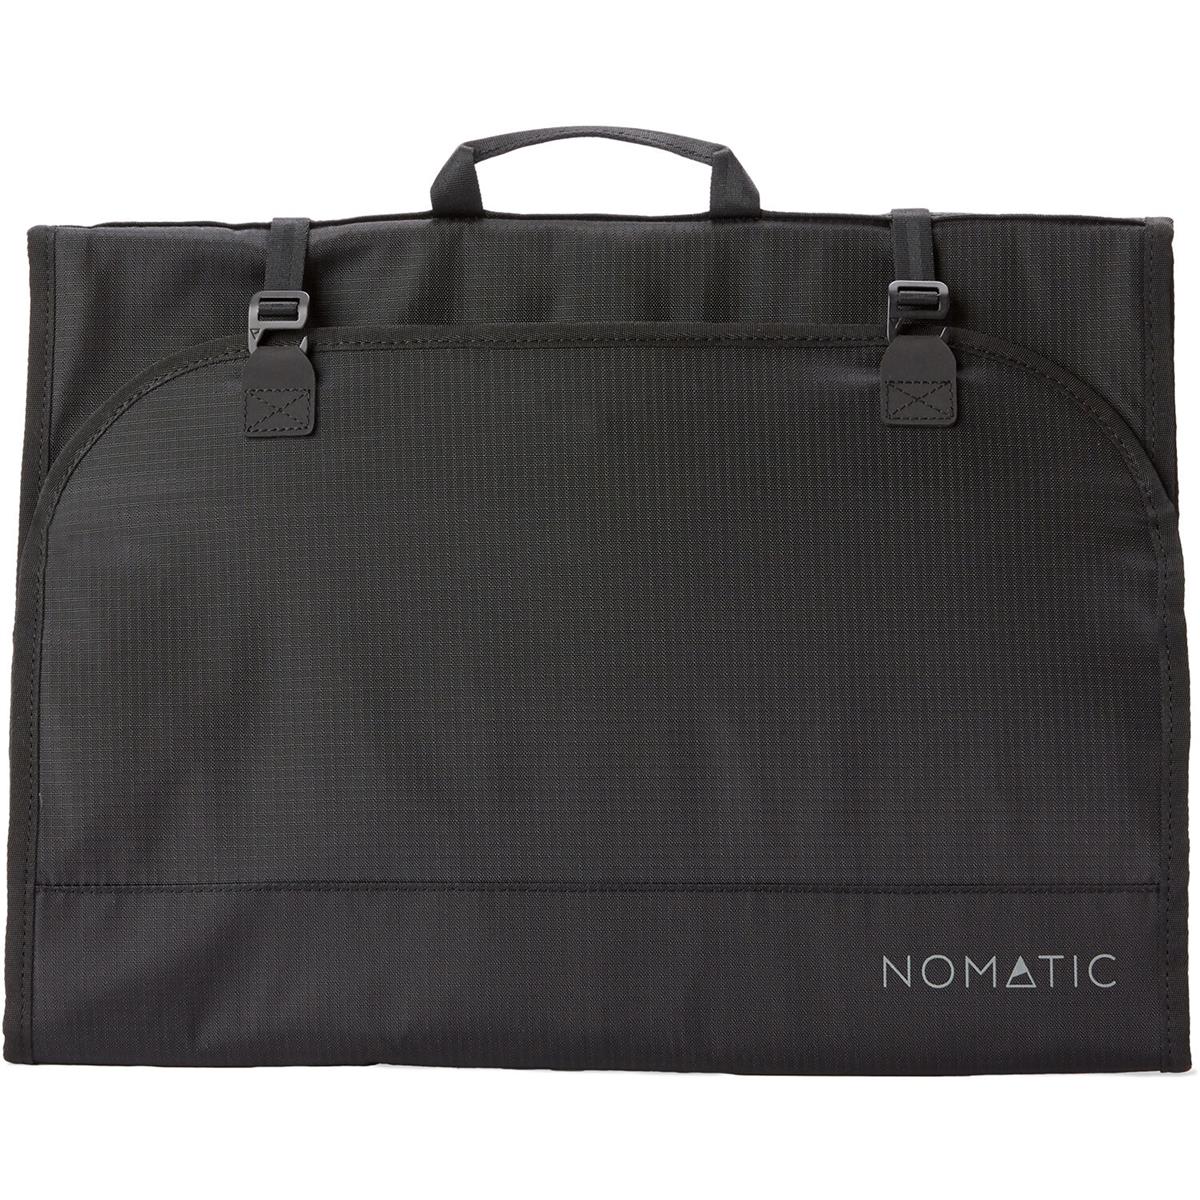 Image of Nomatic Apparel Sleeve